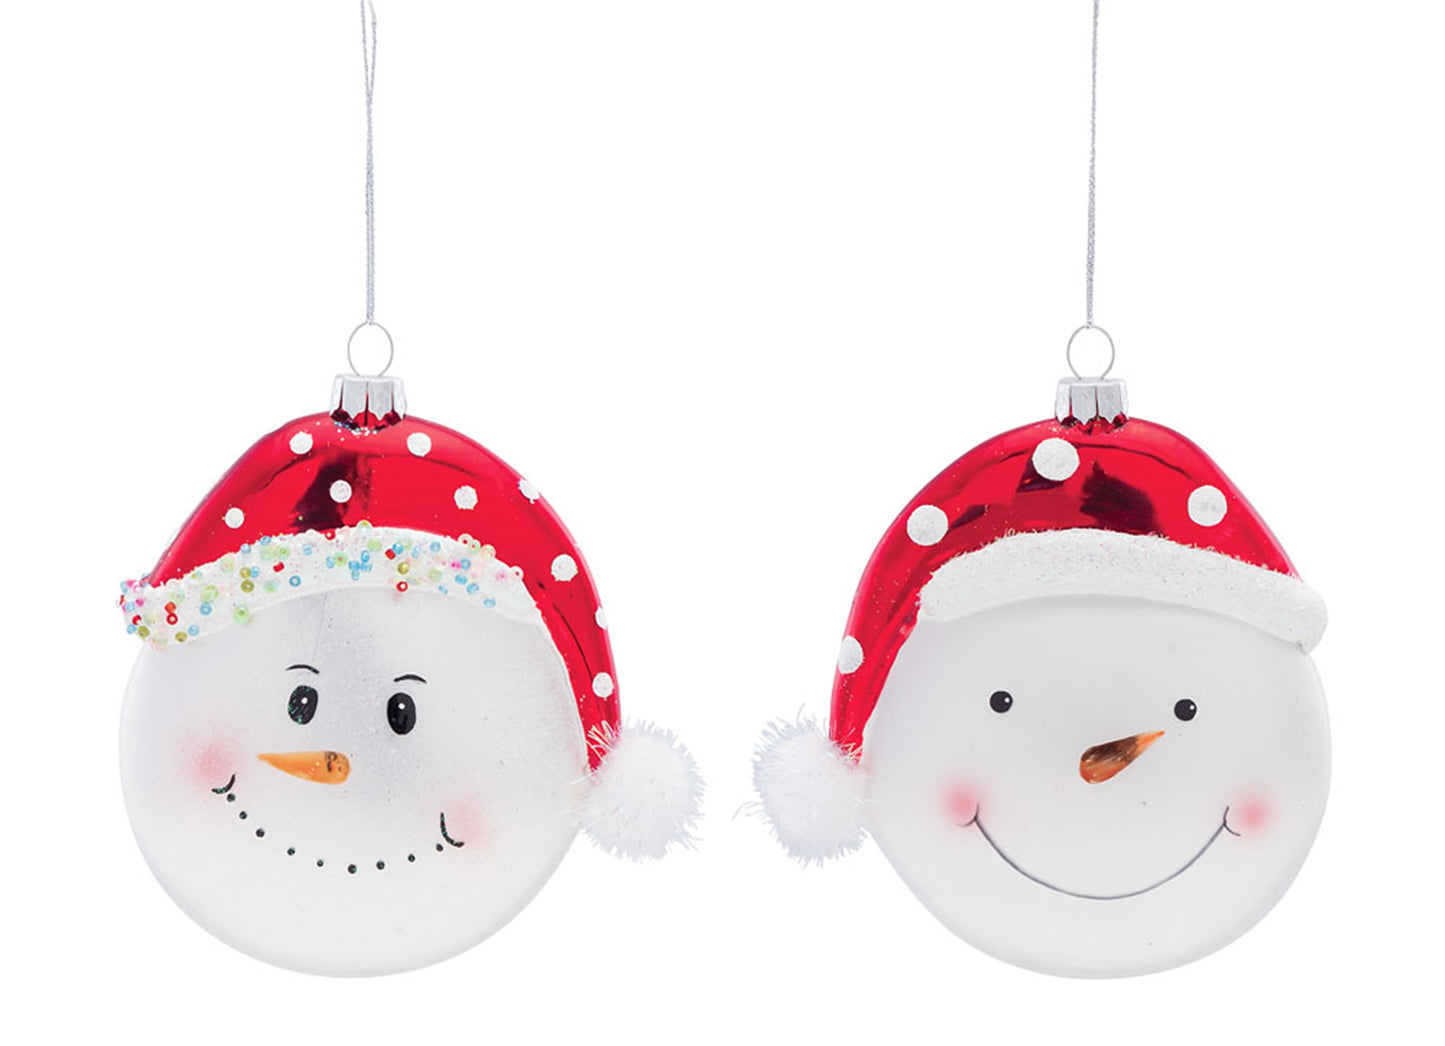 Whimsical Snowman Ball Ornament with Hat (Set of 6)